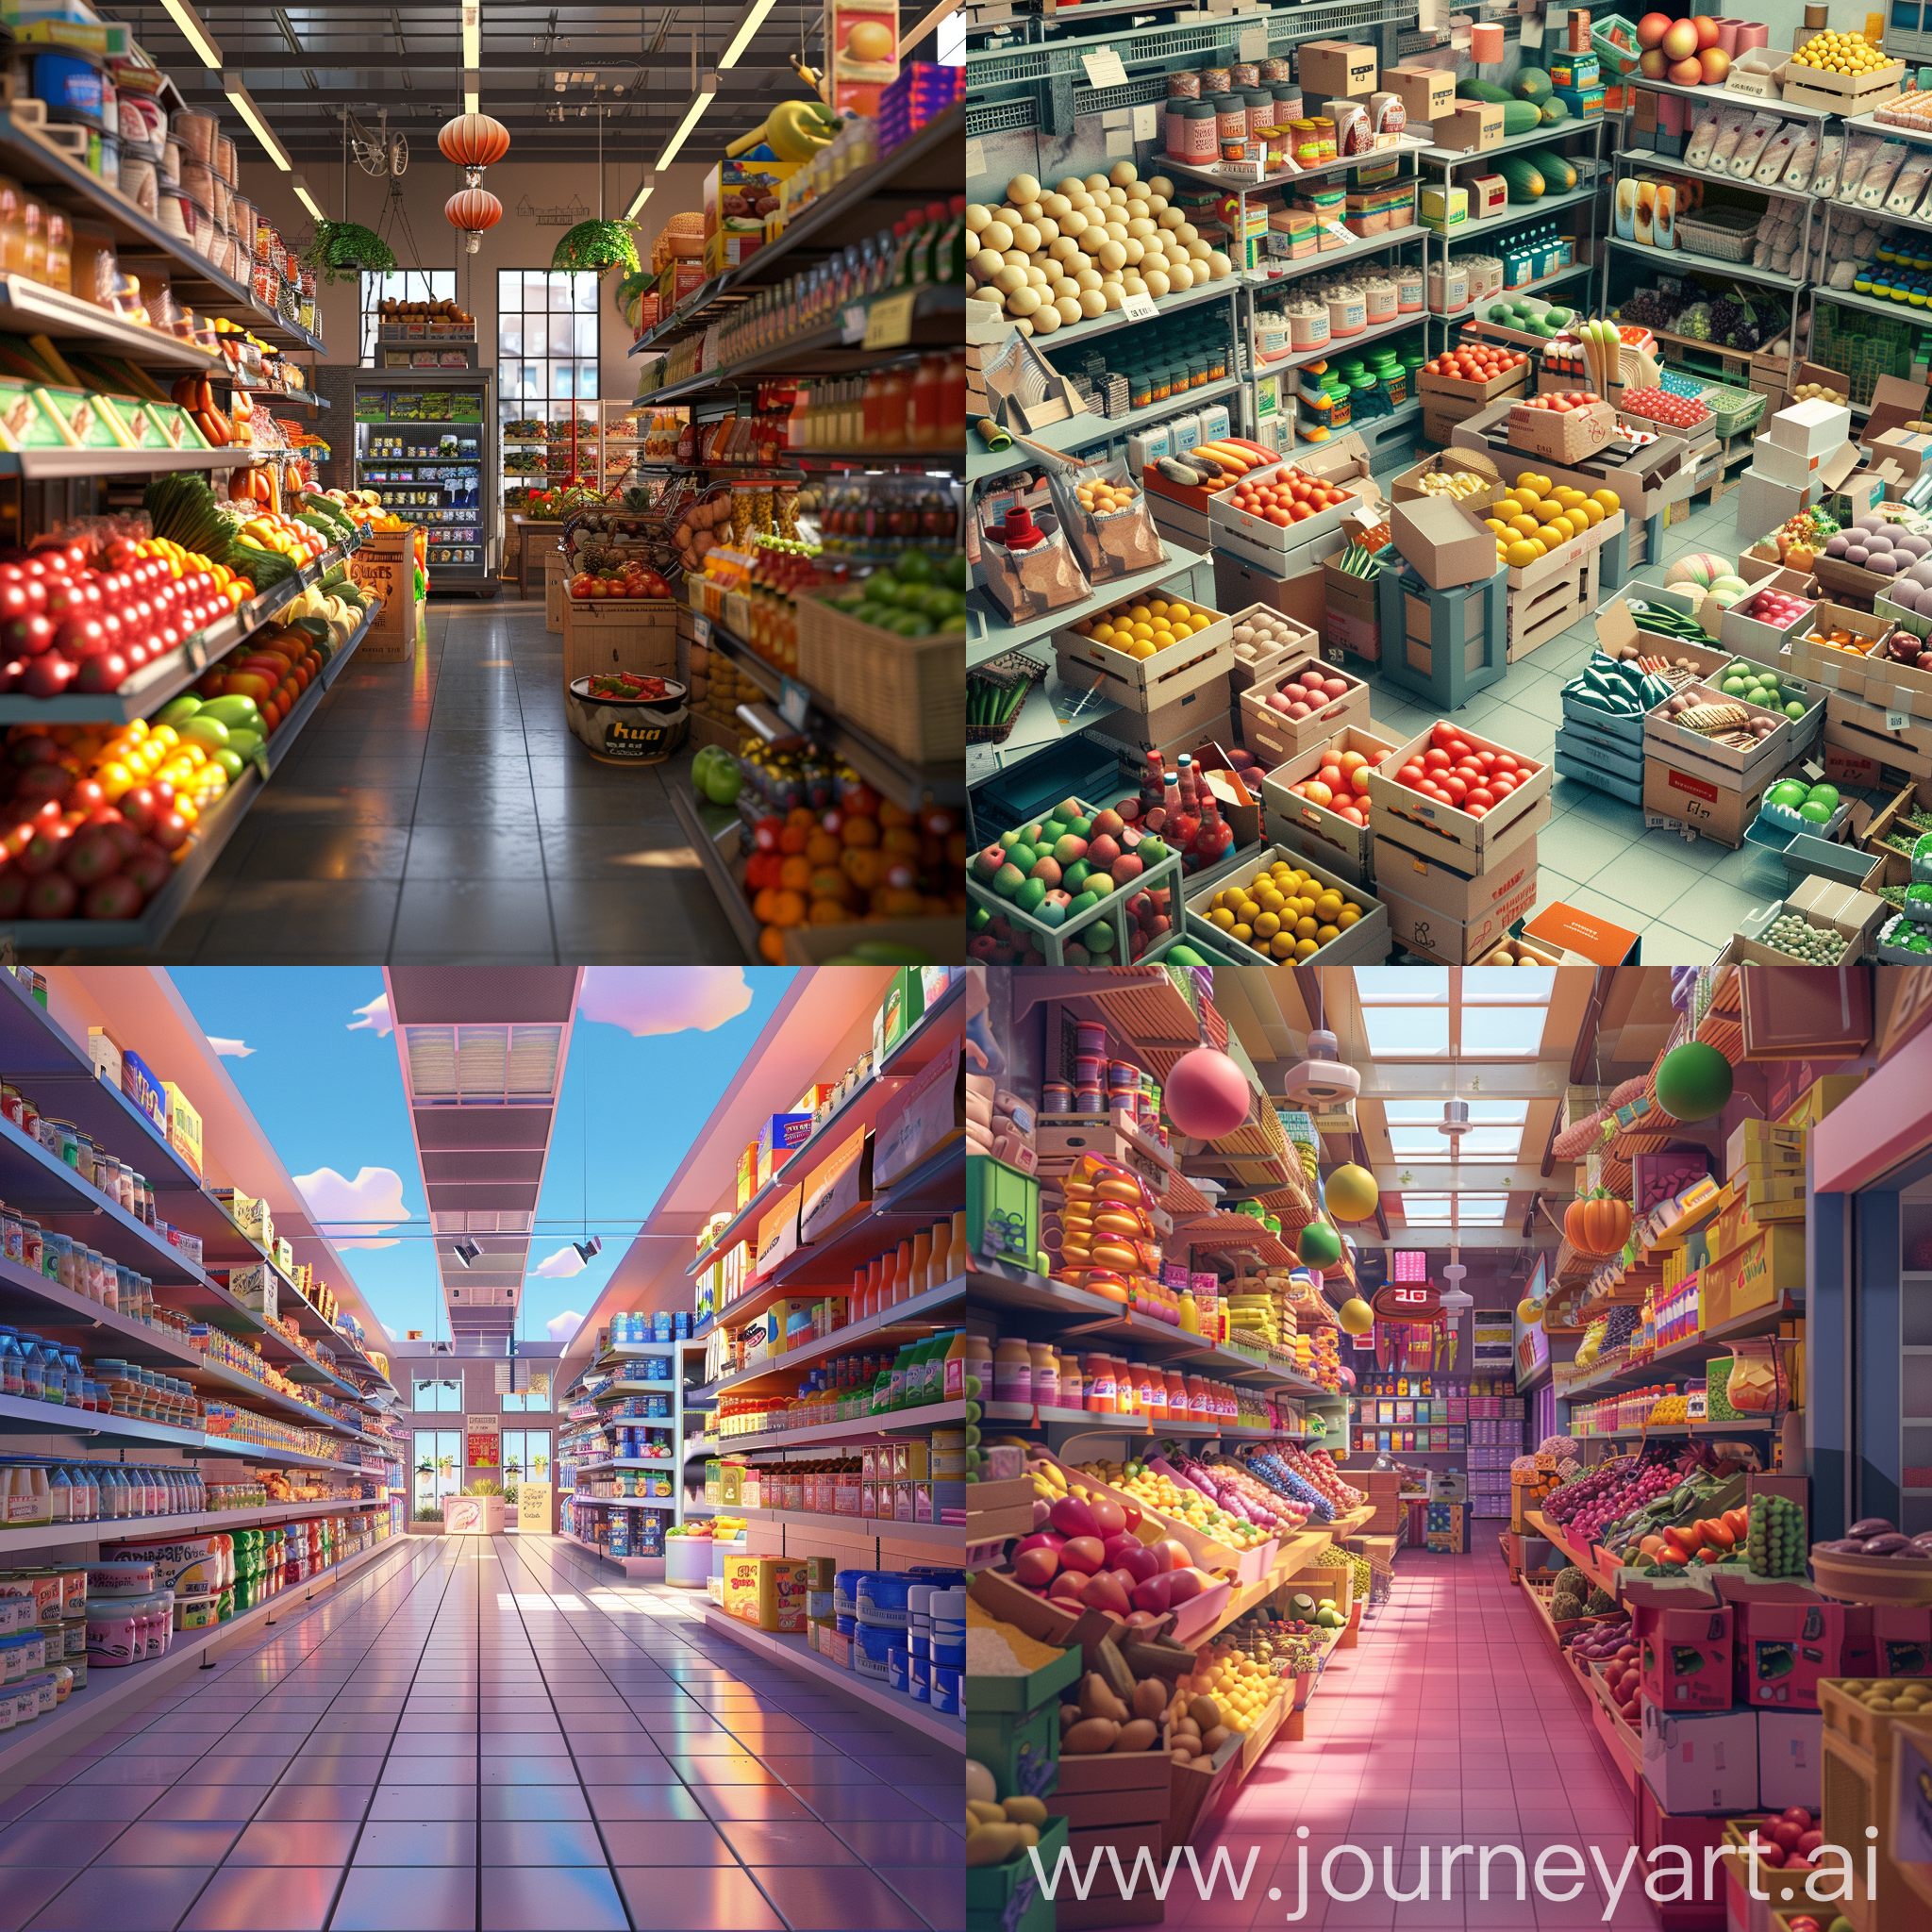 It's a very huge food warehouse :: 3D animation